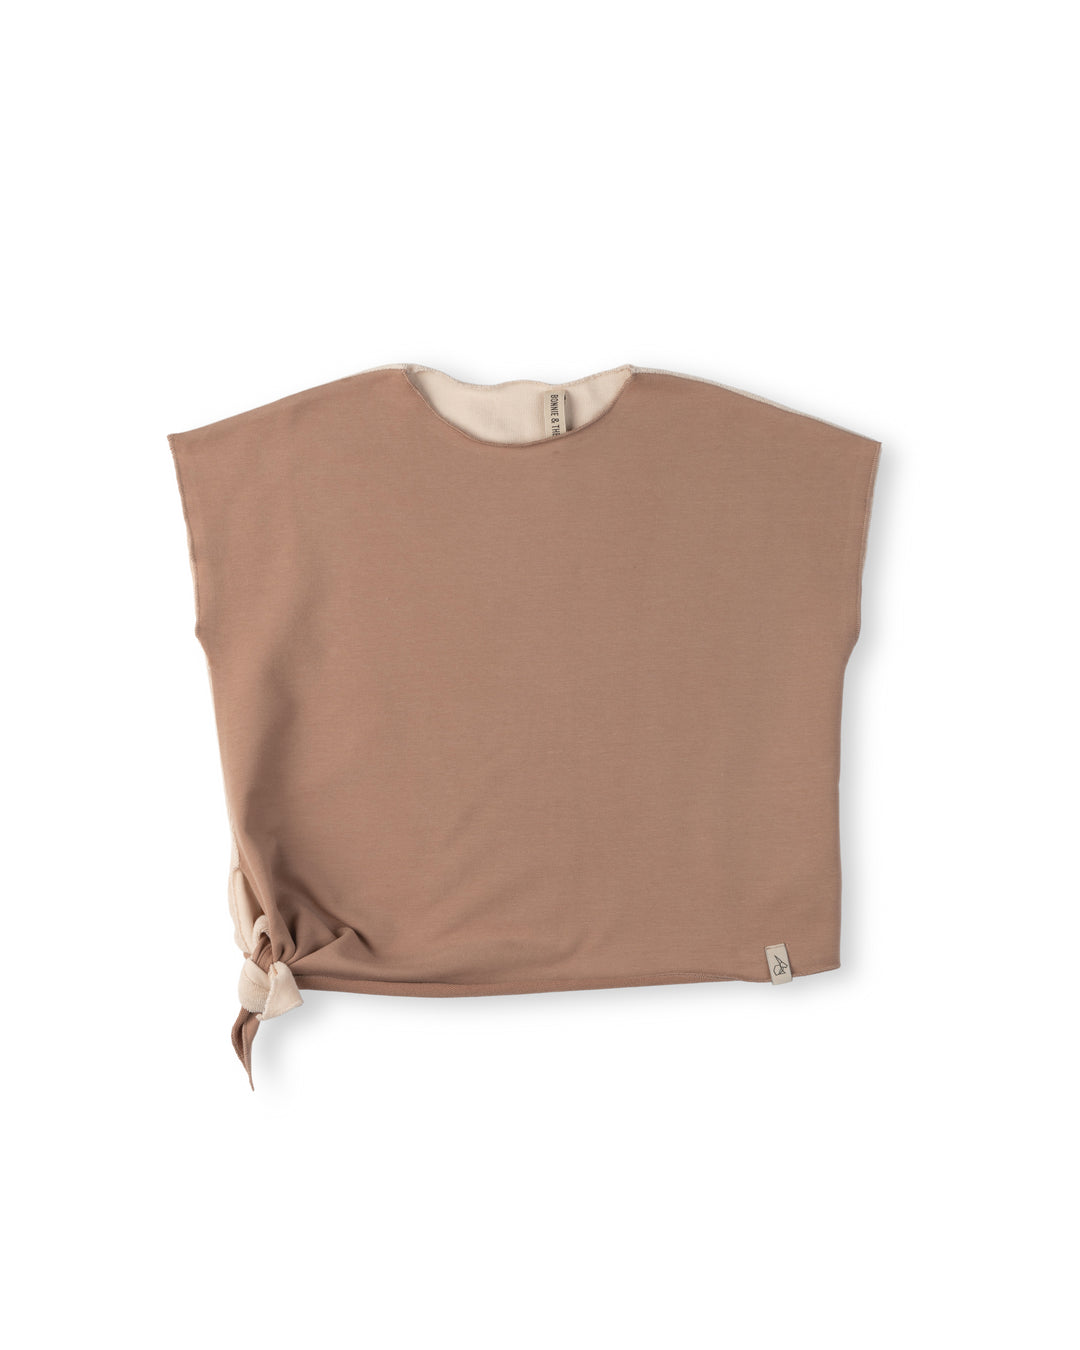 MILLIE KNOTTED T-SHIRT-Mocha/Biscuit